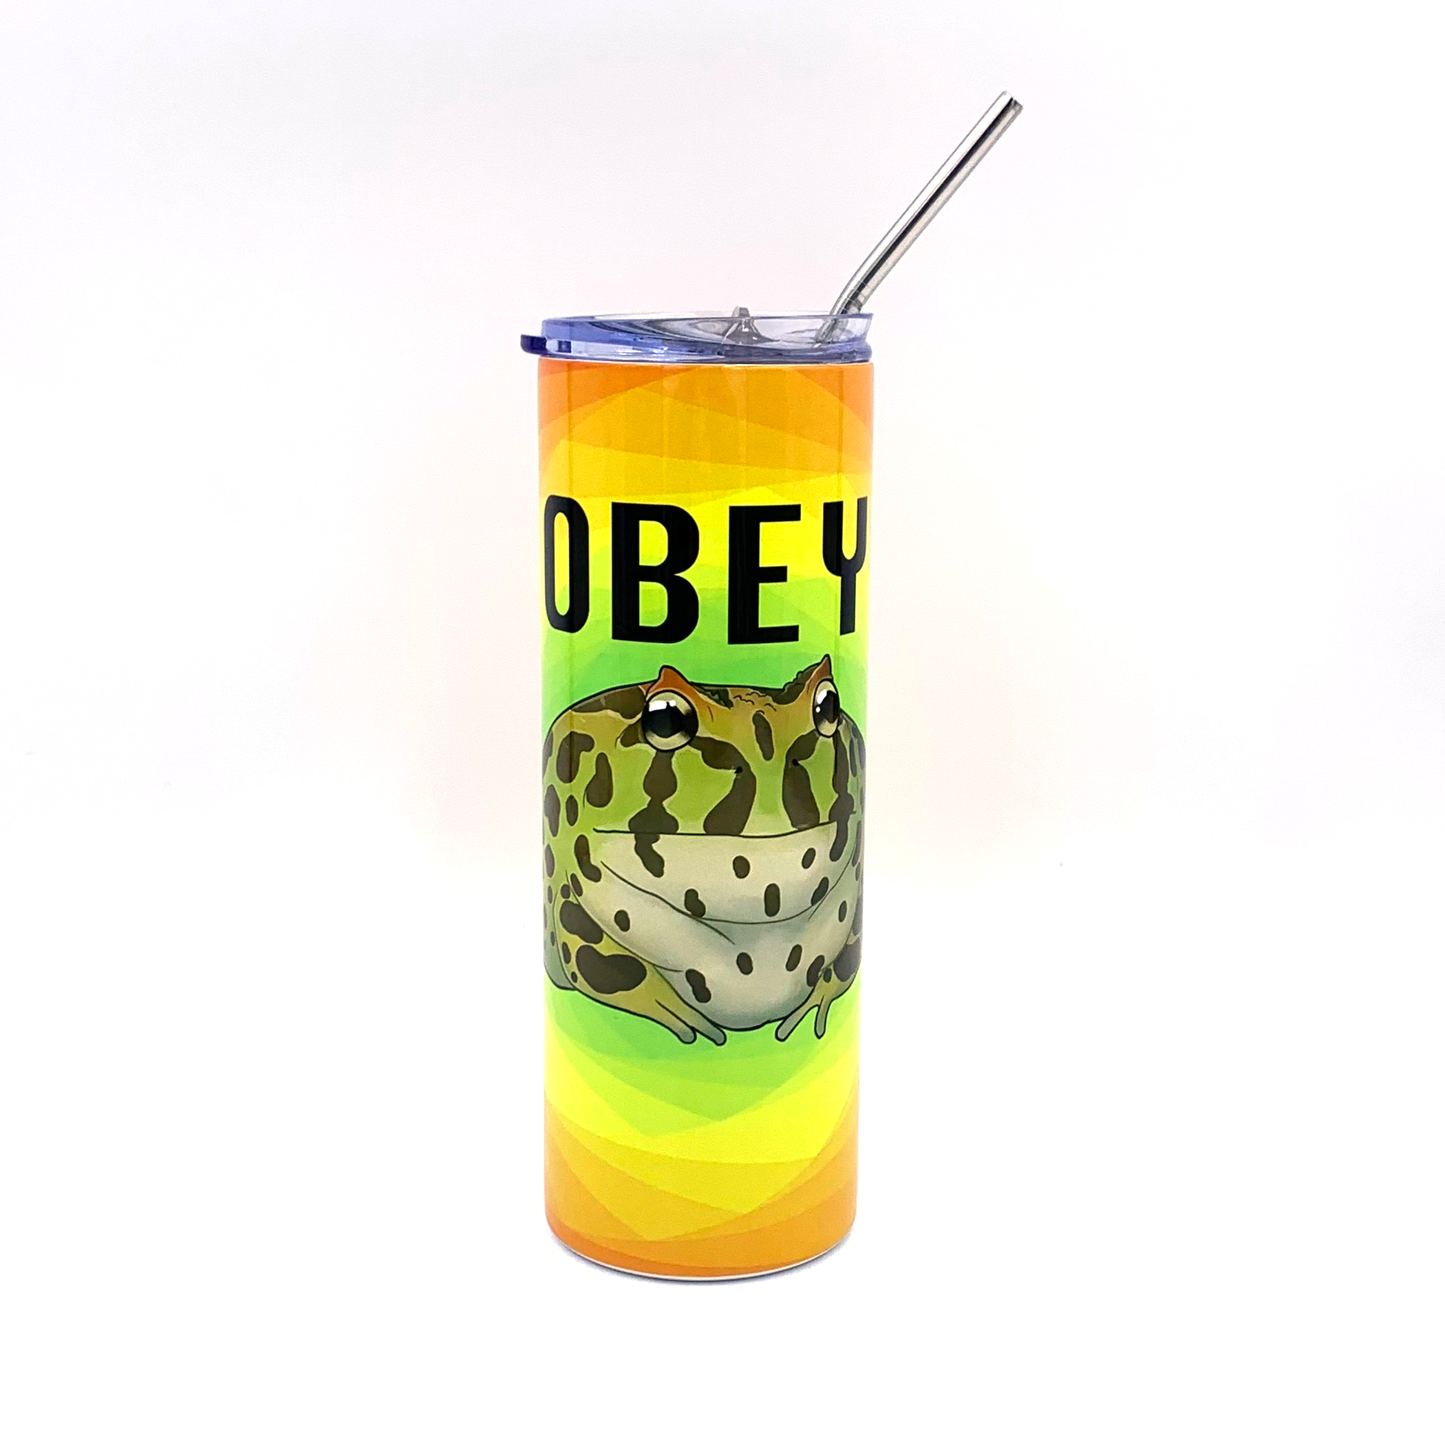 OBEY, Pacman Frog Stainless Steel Tumbler